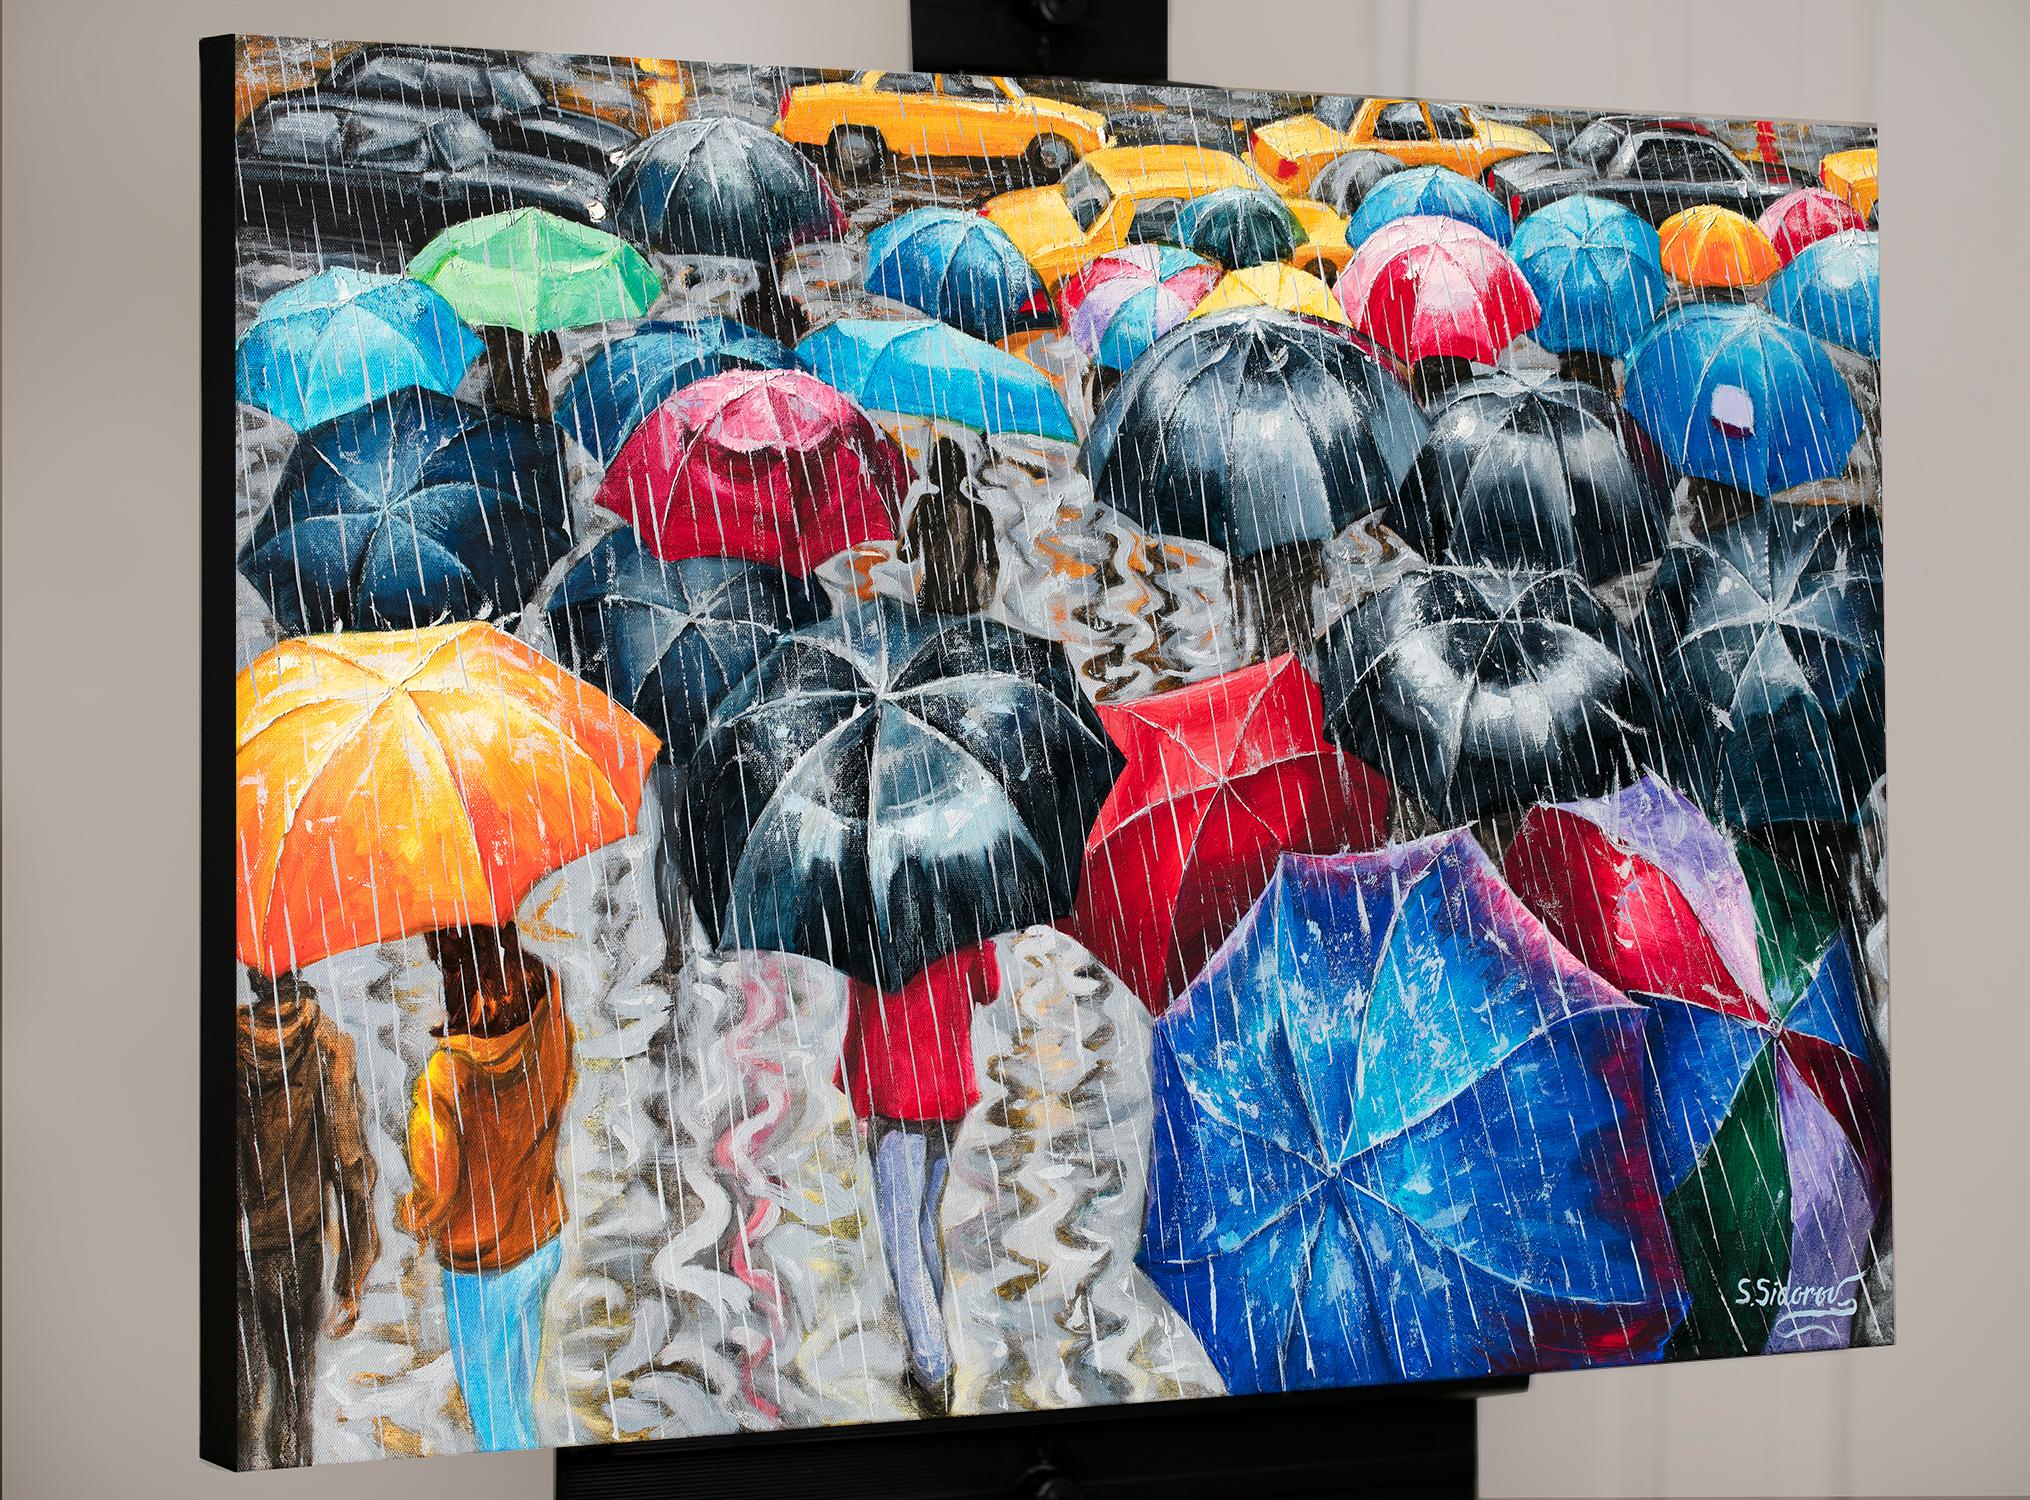 <p>Artist Comments<br>Artist Stanislav Sidorov exhibits colorful umbrellas spread along the busy streets of New York. A bright display of hues parades along the streets amidst water puddles. 